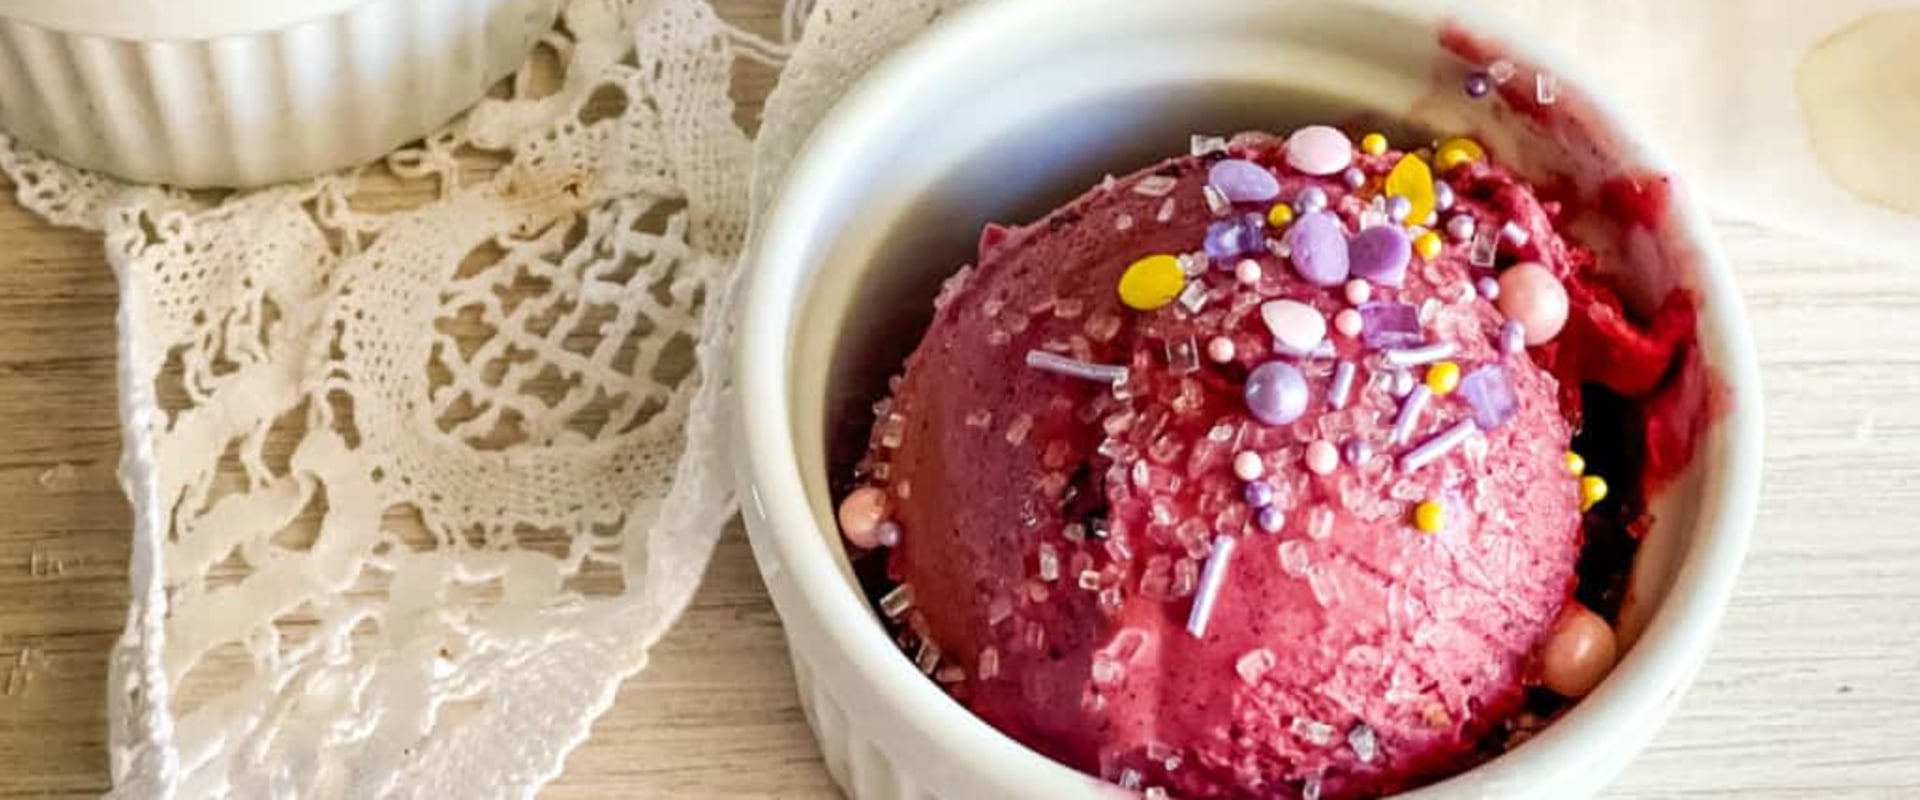 Vegan Frozen Desserts: An Easy and Informed Guide